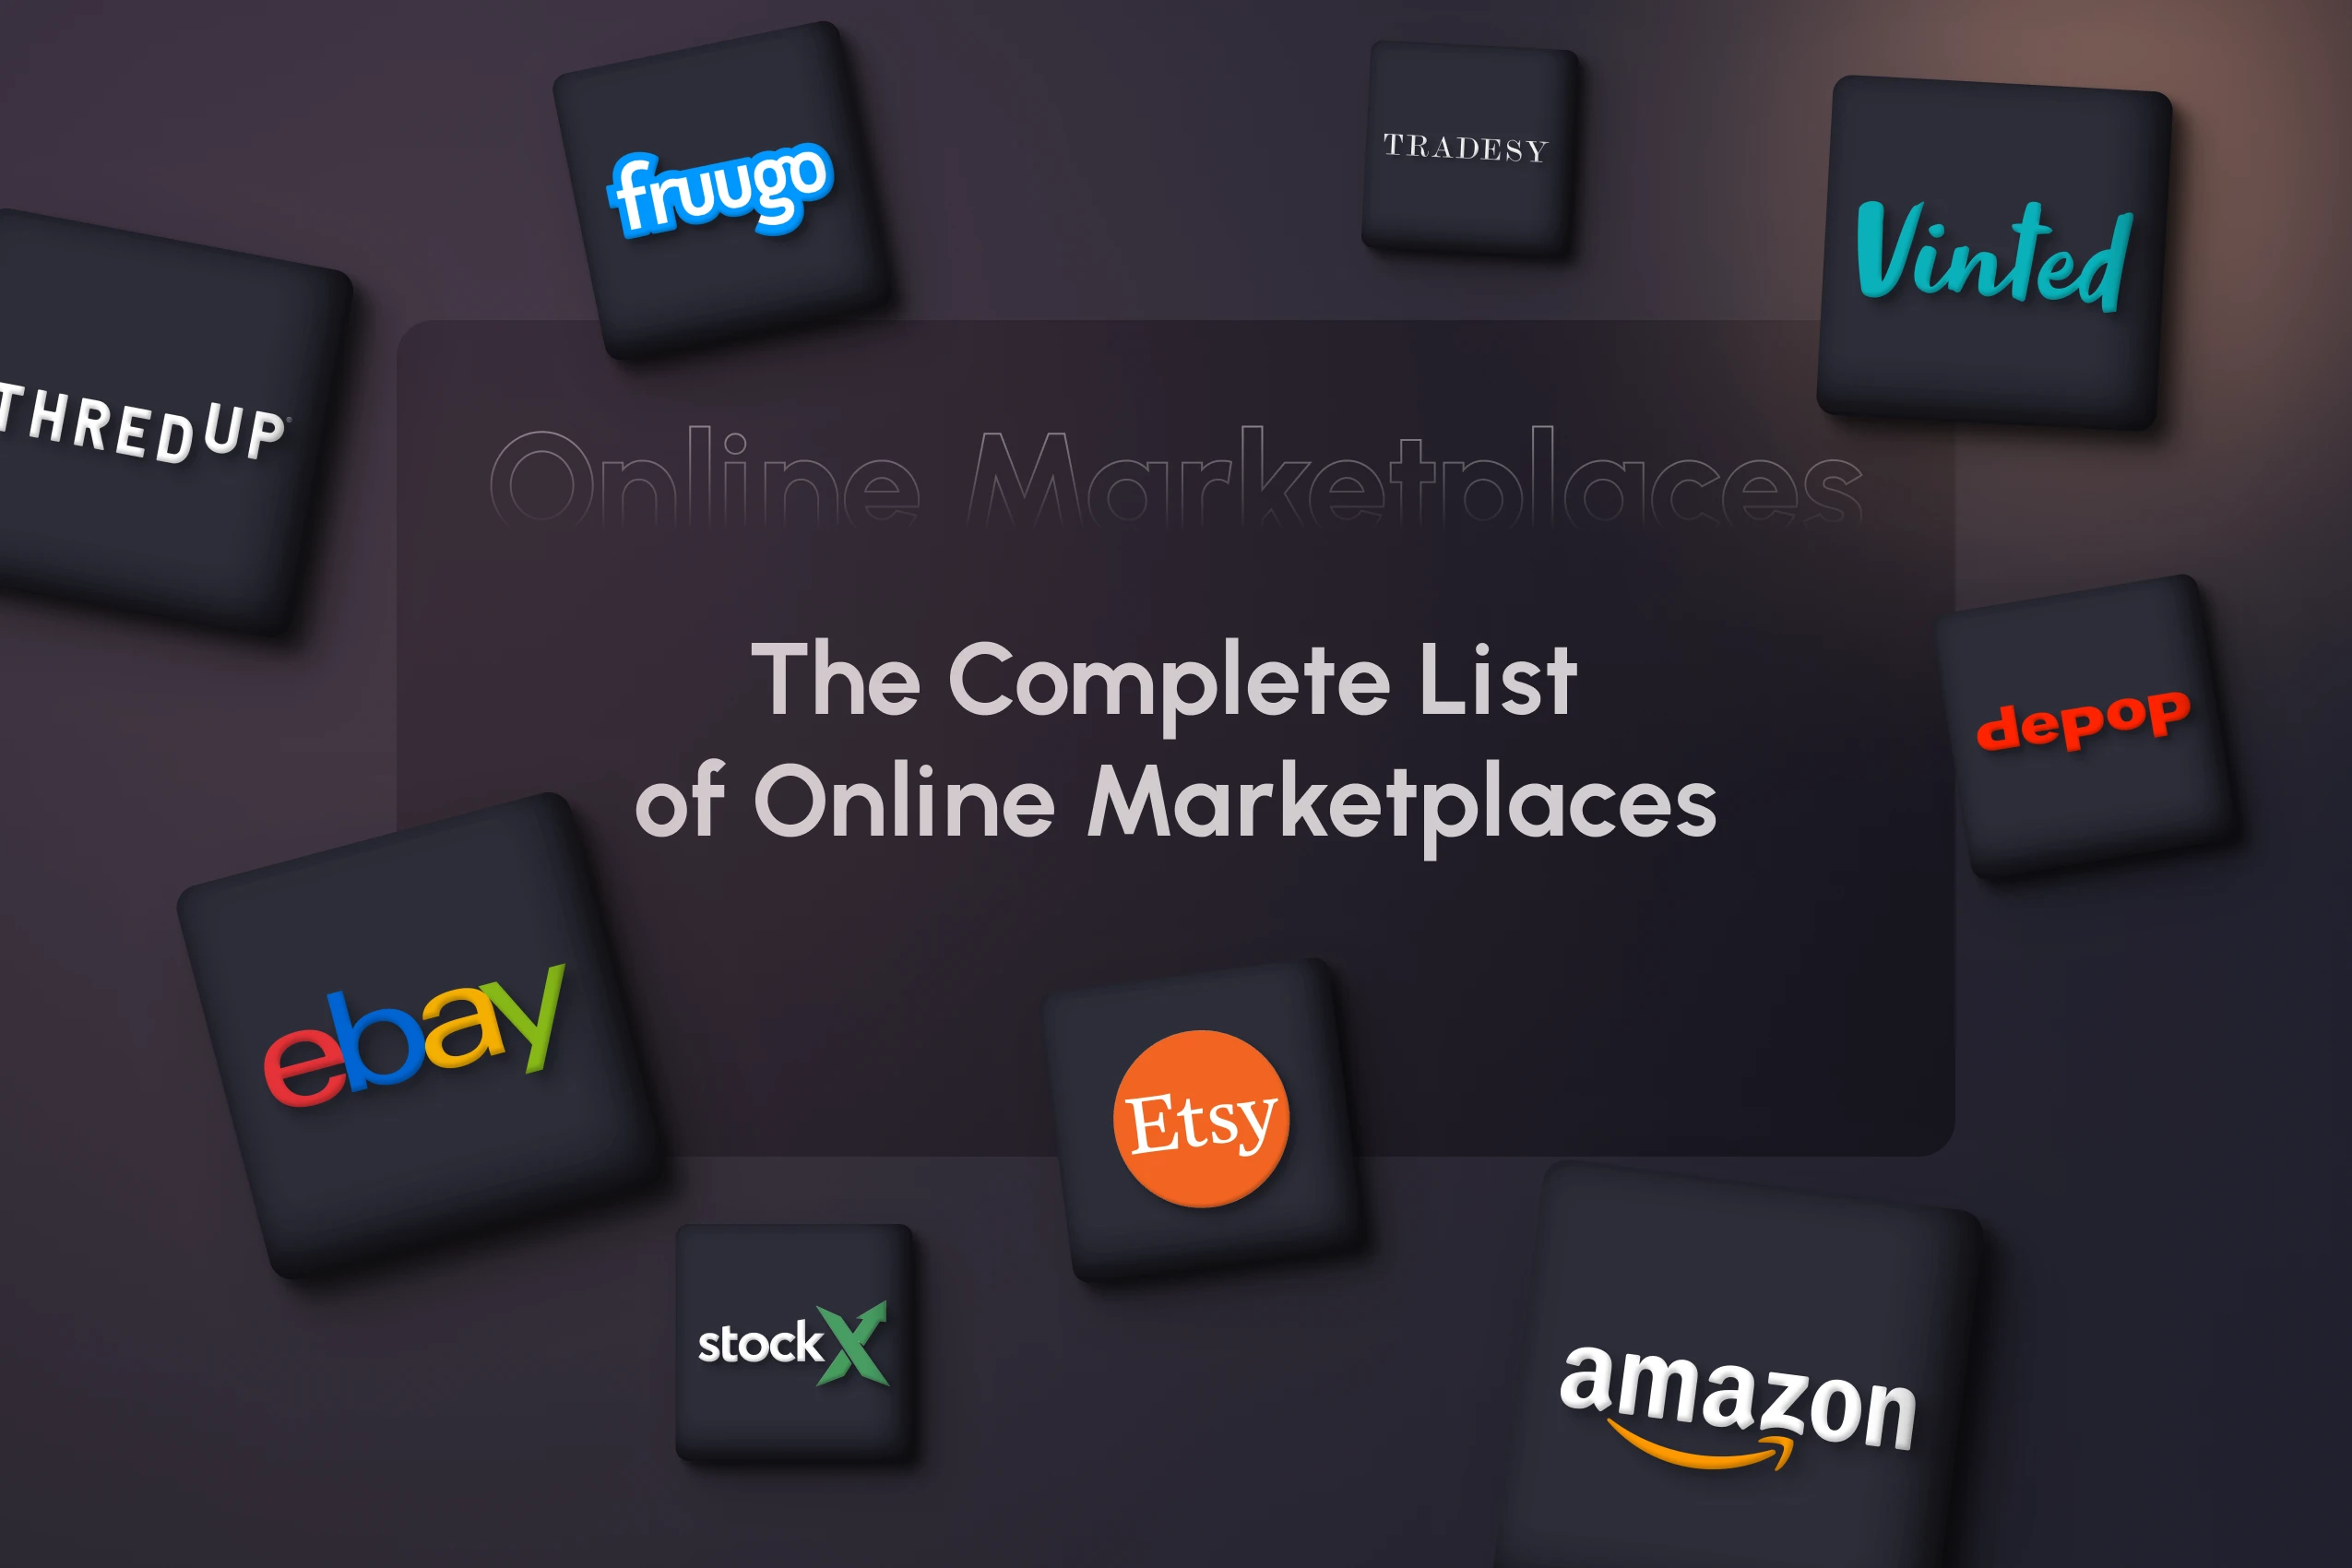 The Complete List of Online Marketplaces